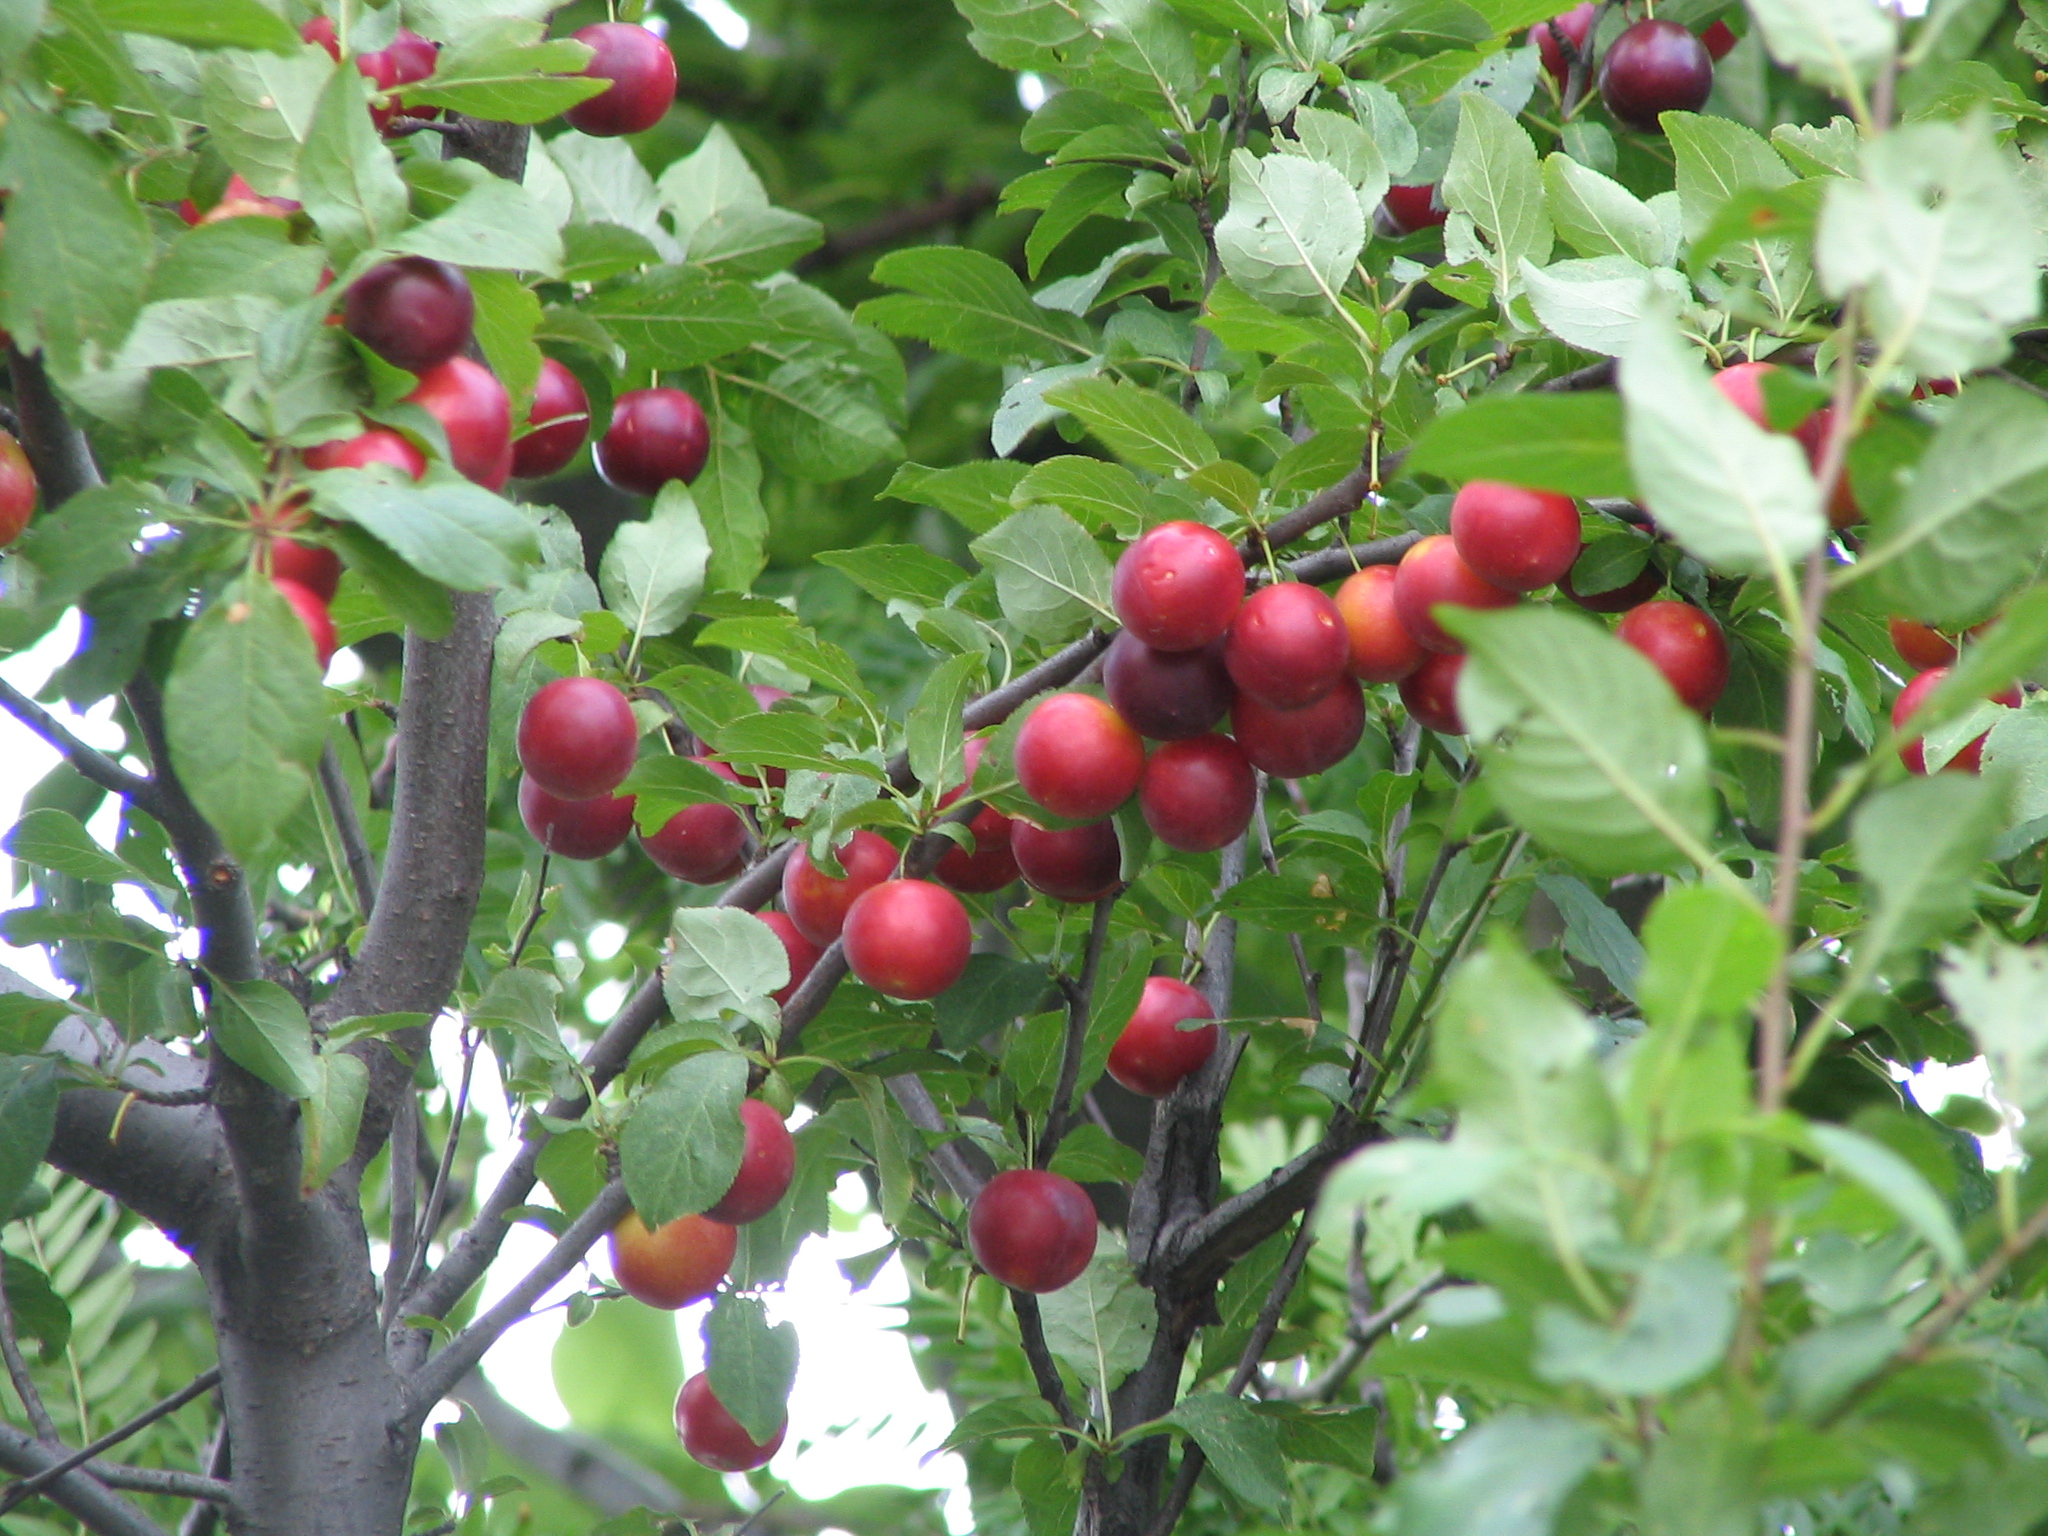 What kind of fruit tree/fruit is this? - fruits | Ask MetaFilter